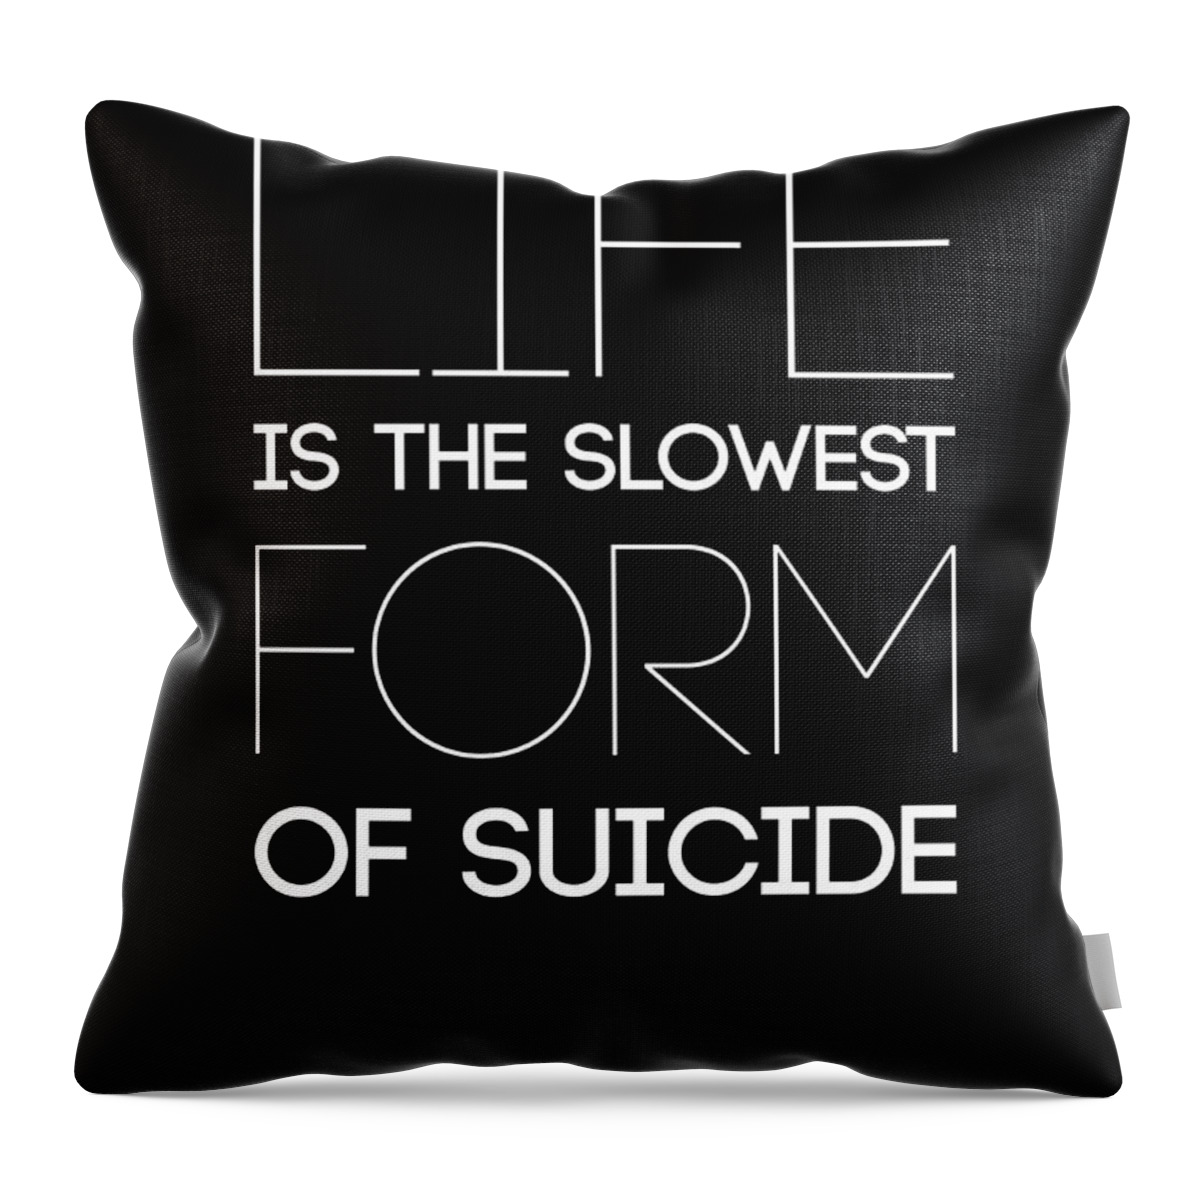 Life Throw Pillow featuring the digital art Life is the Slowest Form of Suicide 1 by Naxart Studio